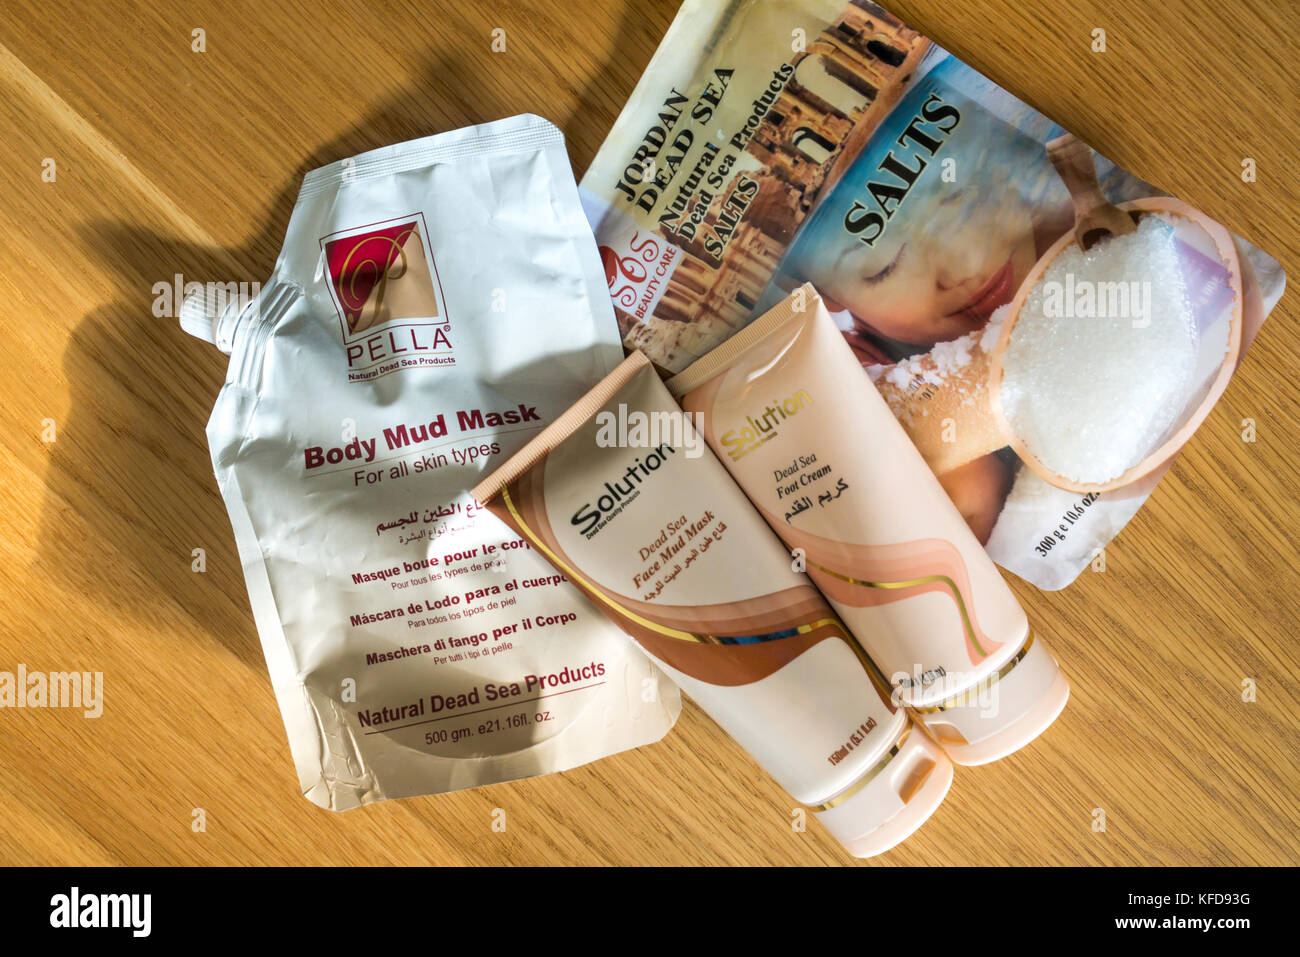 Holiday souvenirs of cosmetic products from the Dead Sea, Jordan, including  bath salts, foot cream, body mud mask, and face mud mask Stock Photo - Alamy